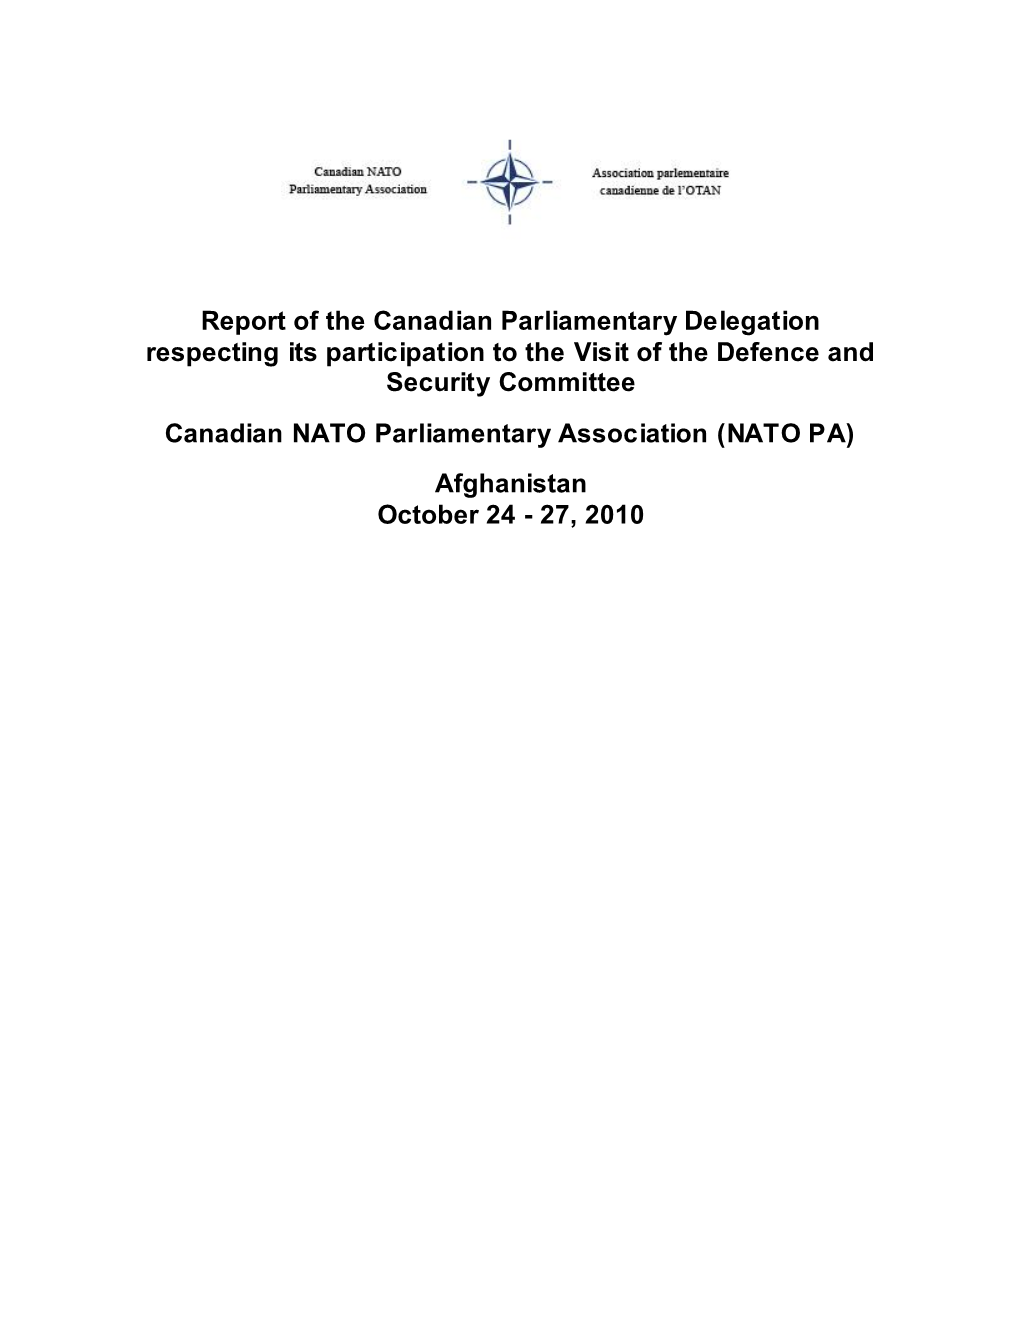 Report of the Canadian Parliamentary Delegation Respecting Its